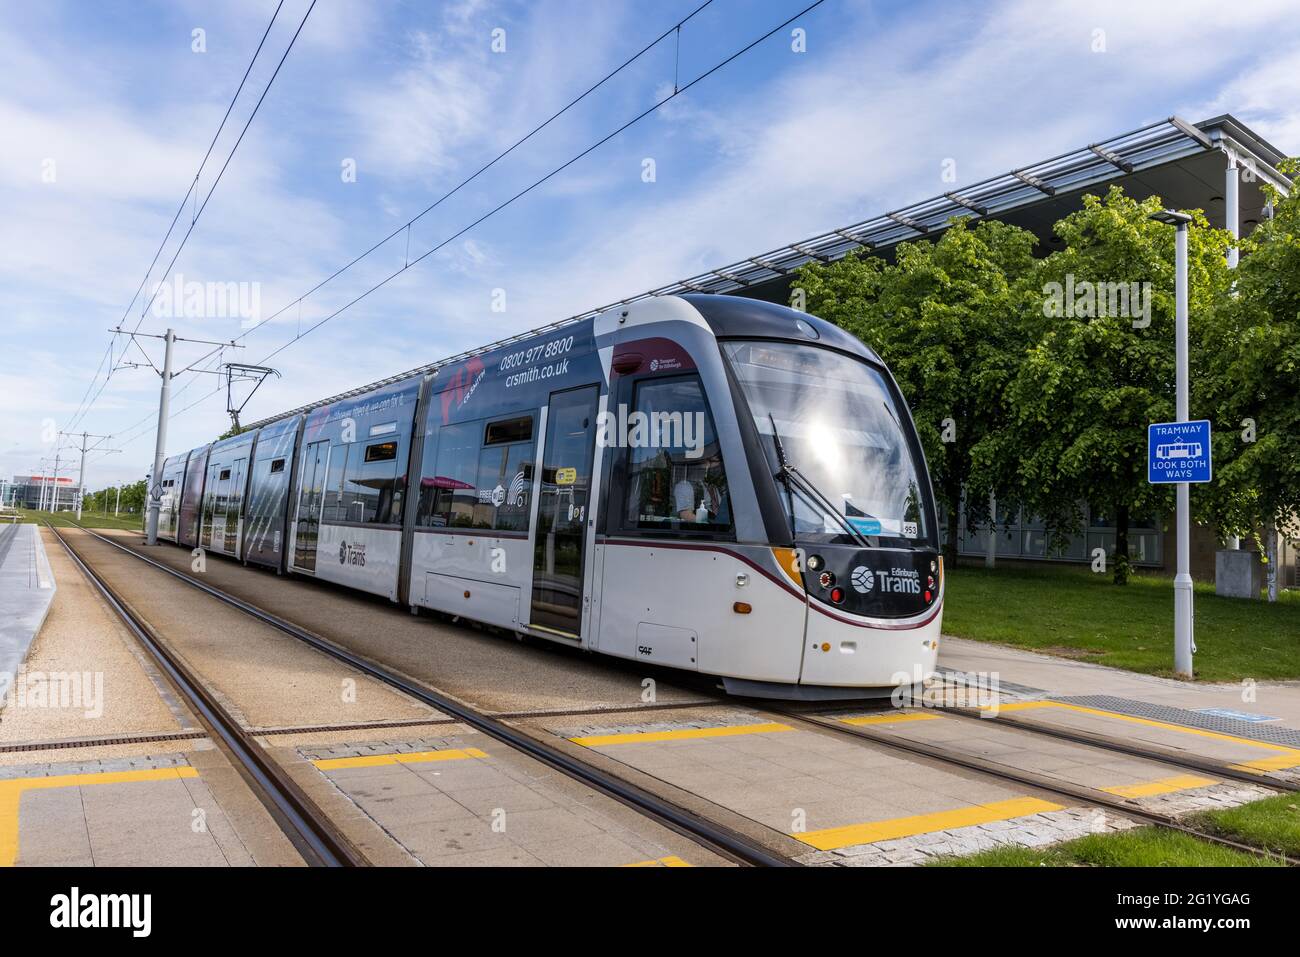 An Edinburgh tram branded with CR Smith advertising at a tram stop in Edinburgh Park on a sunny day Stock Photo